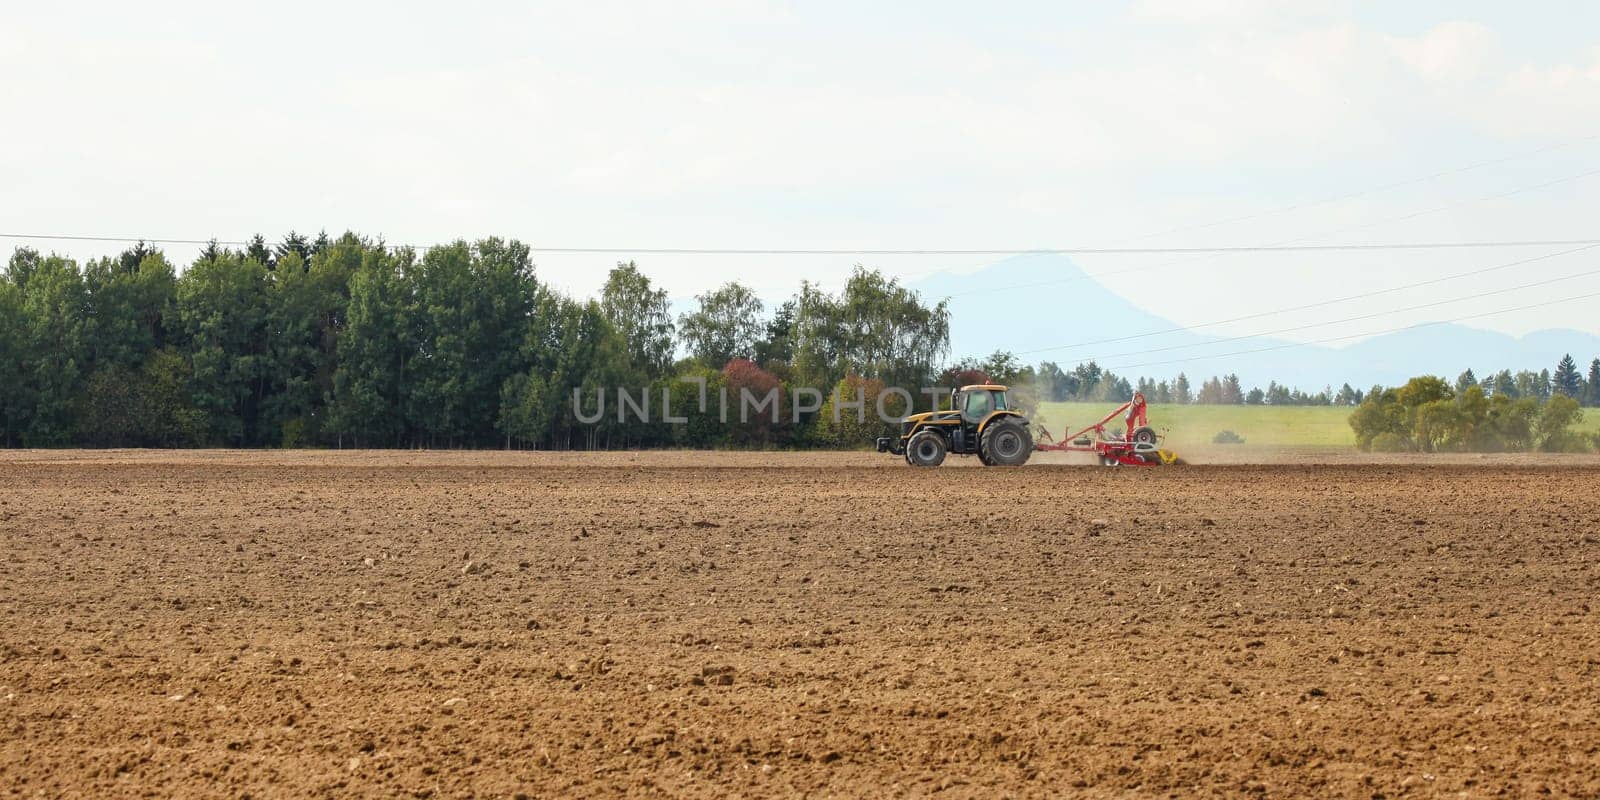 Tractor sowing in empty field on countryside with some mountains in background.